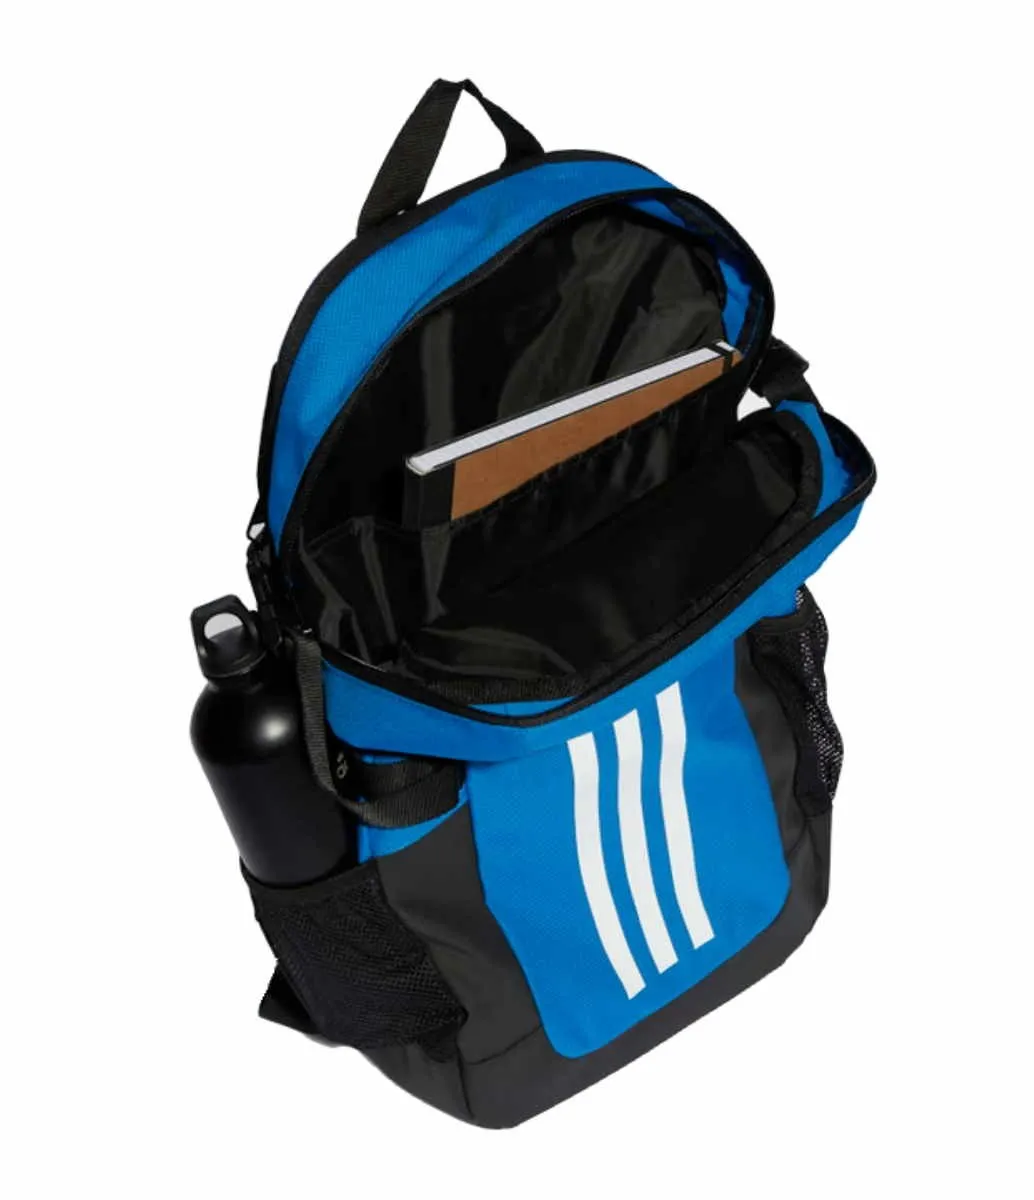 adidas Power Backpack royal blue with black